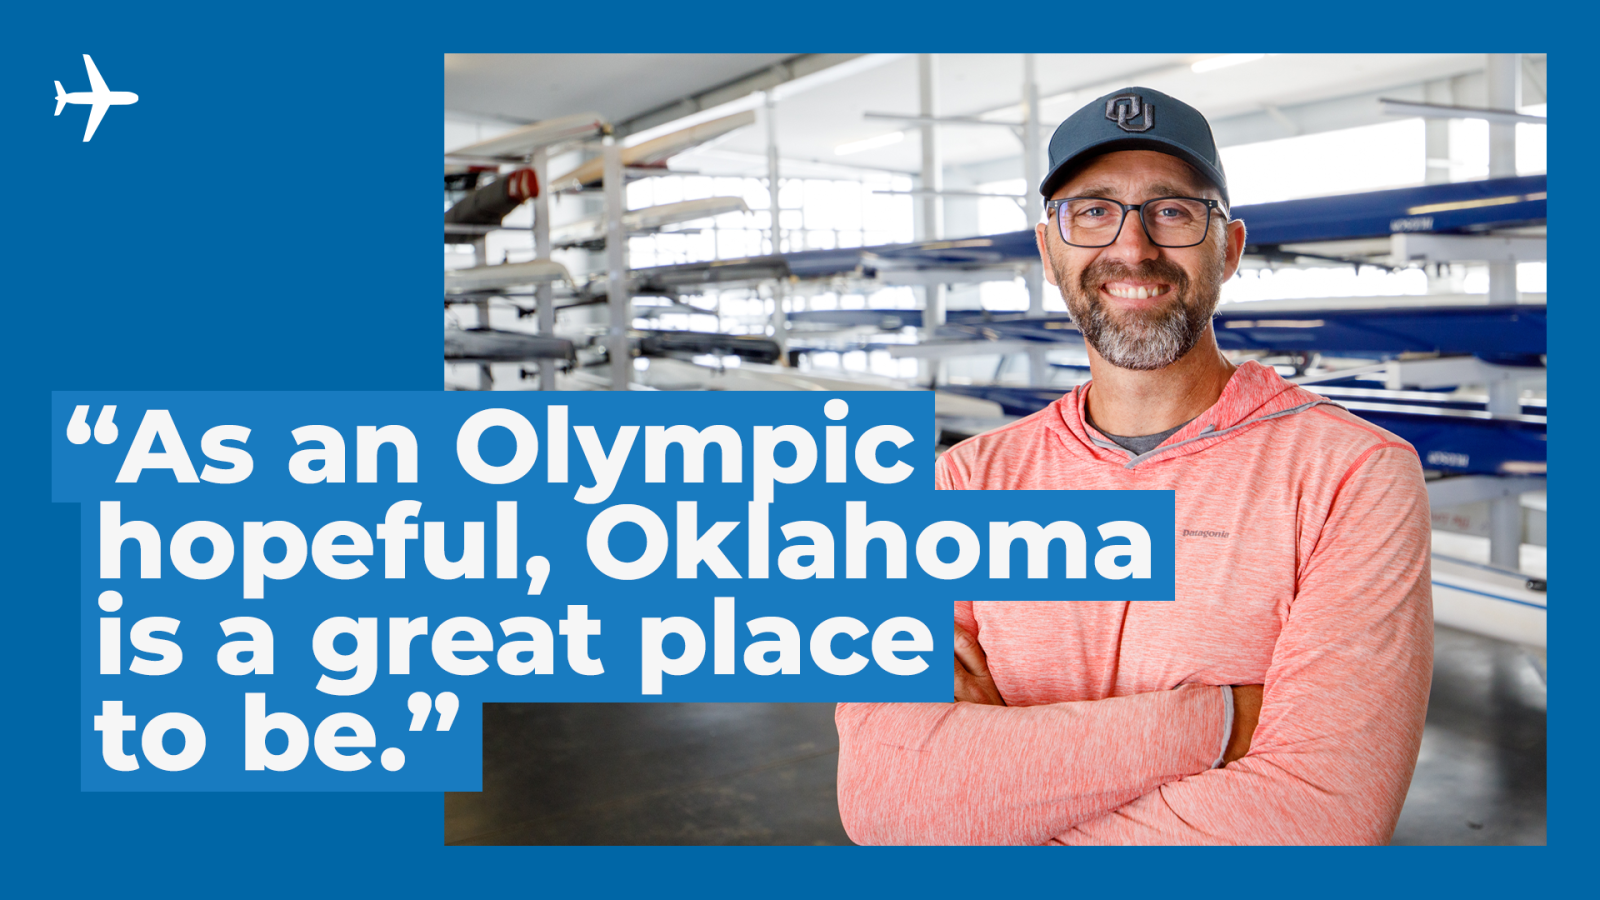 Bryan with a quote "As an Olympic hopeful, Oklahoma is a great place to be."